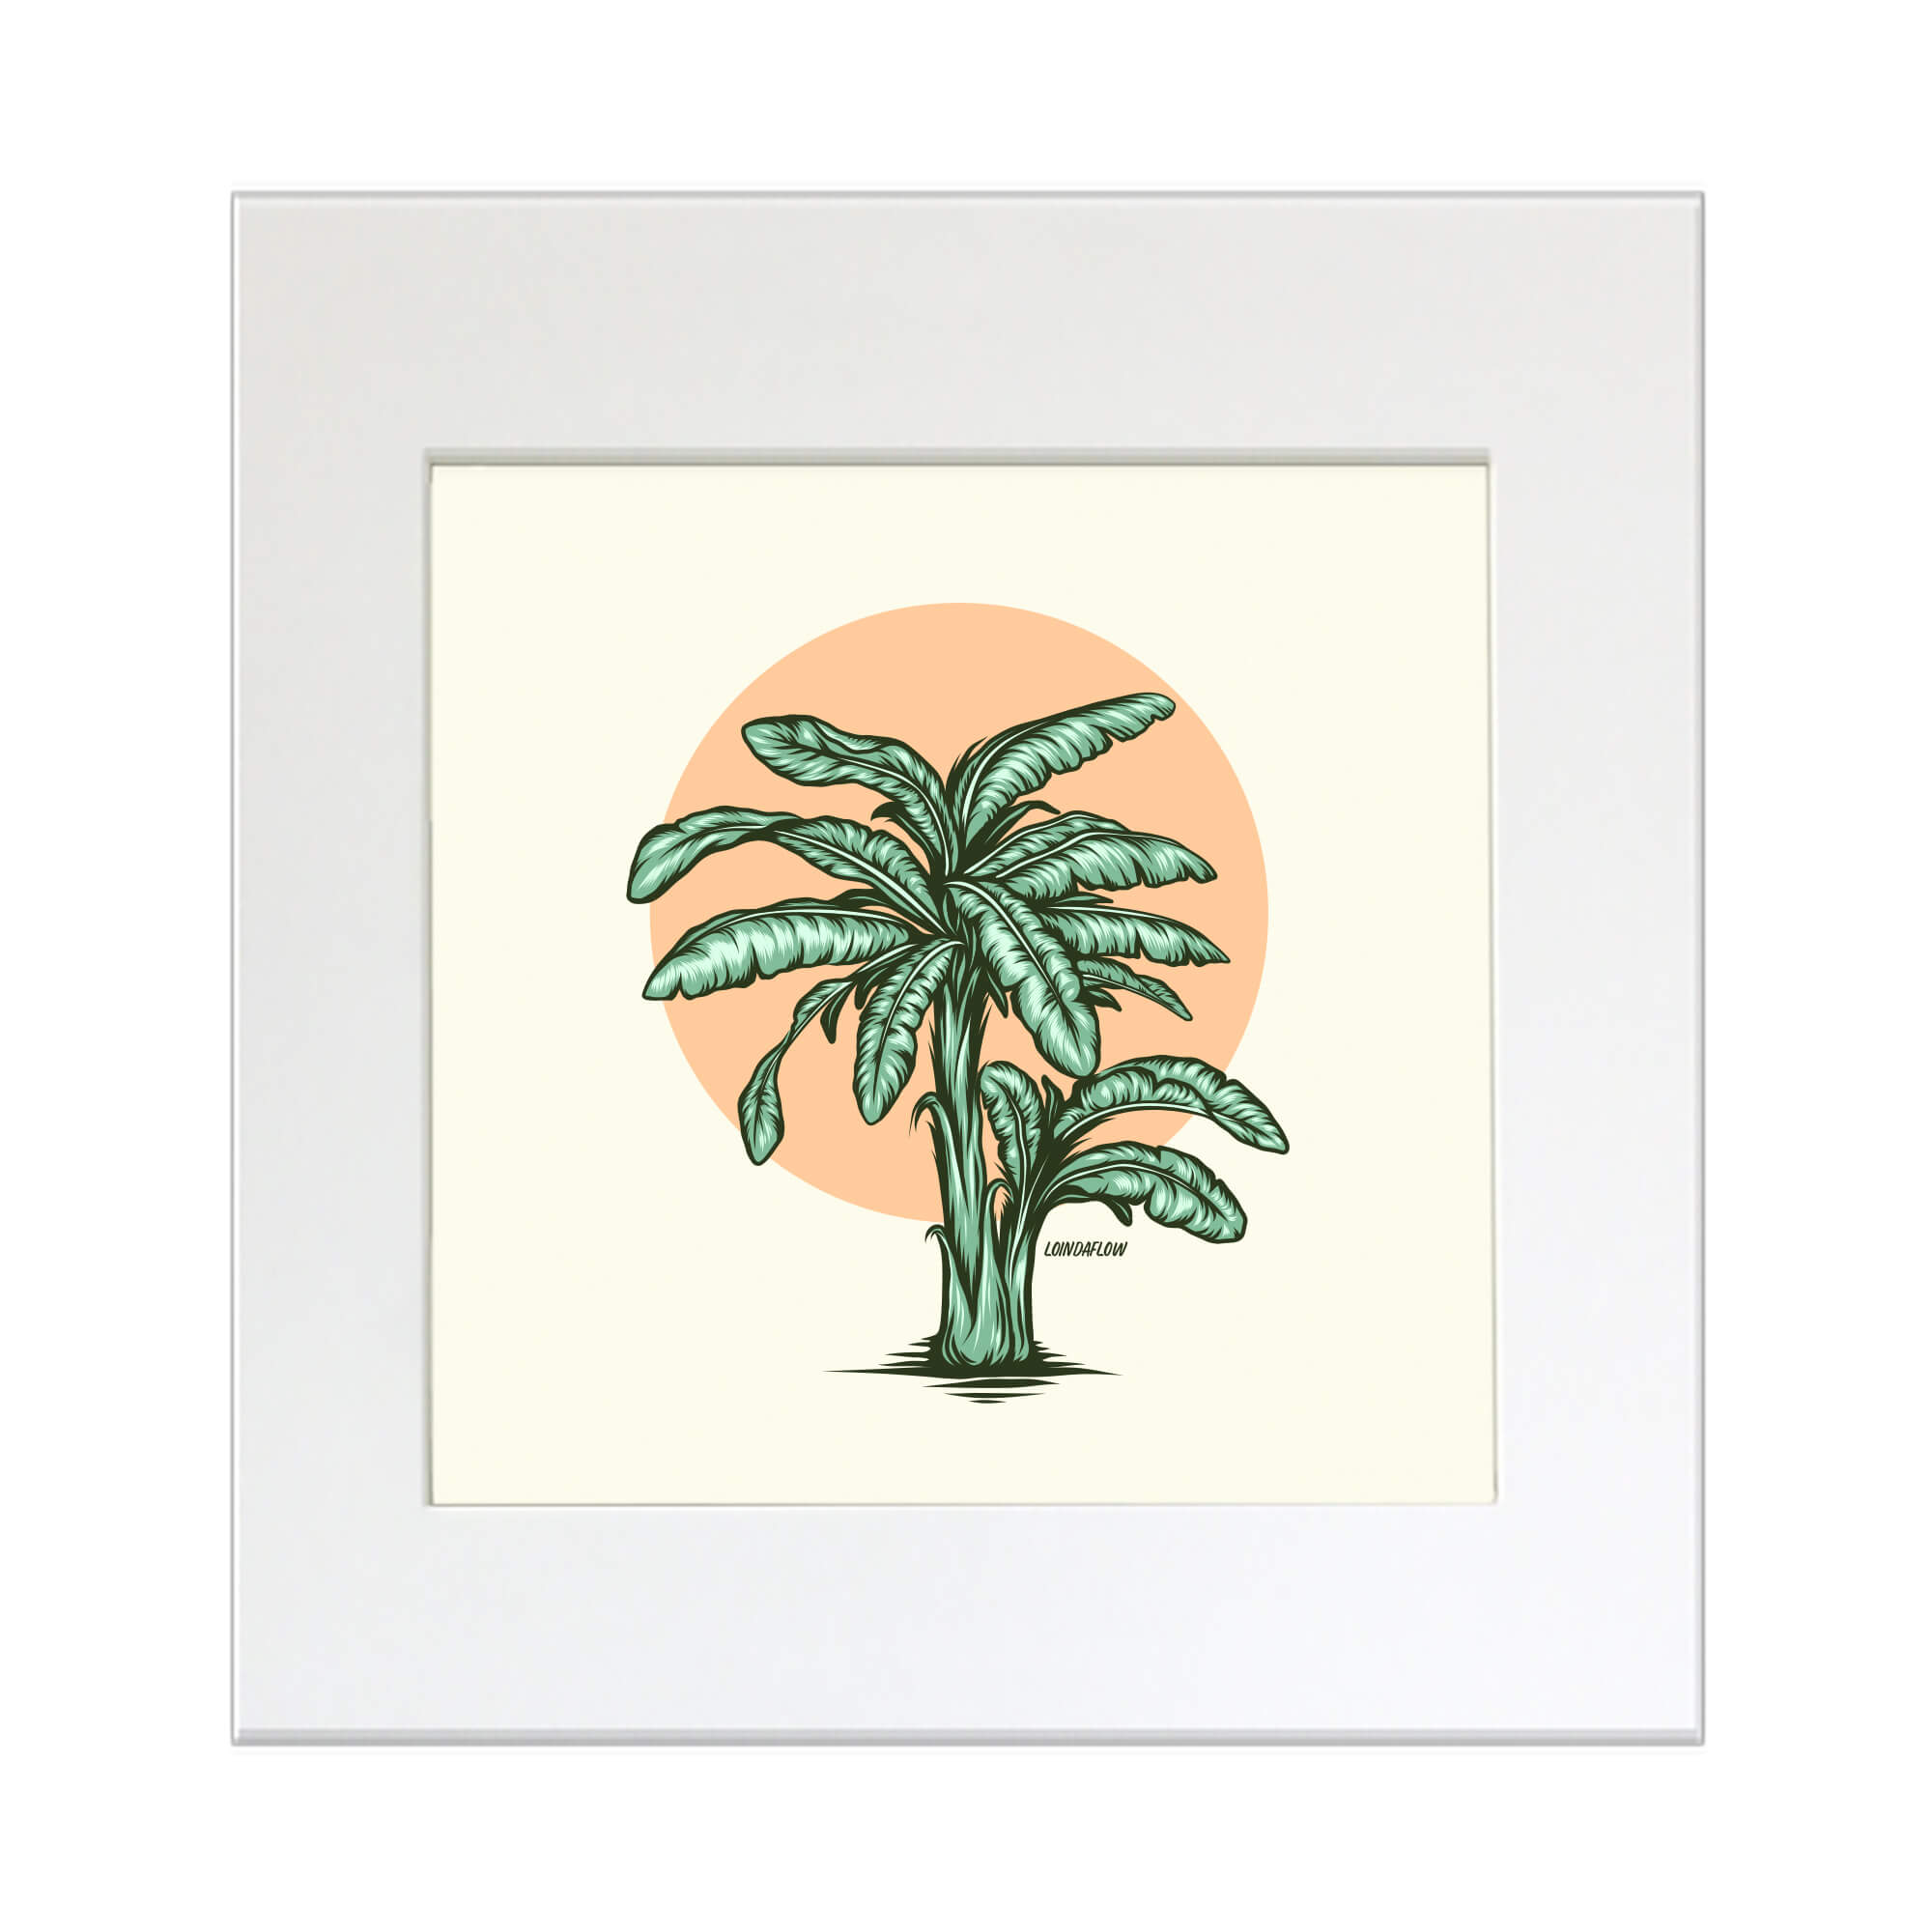 Matted art print of a banana tree with yellow background by Hawaii artist Laihha Organna